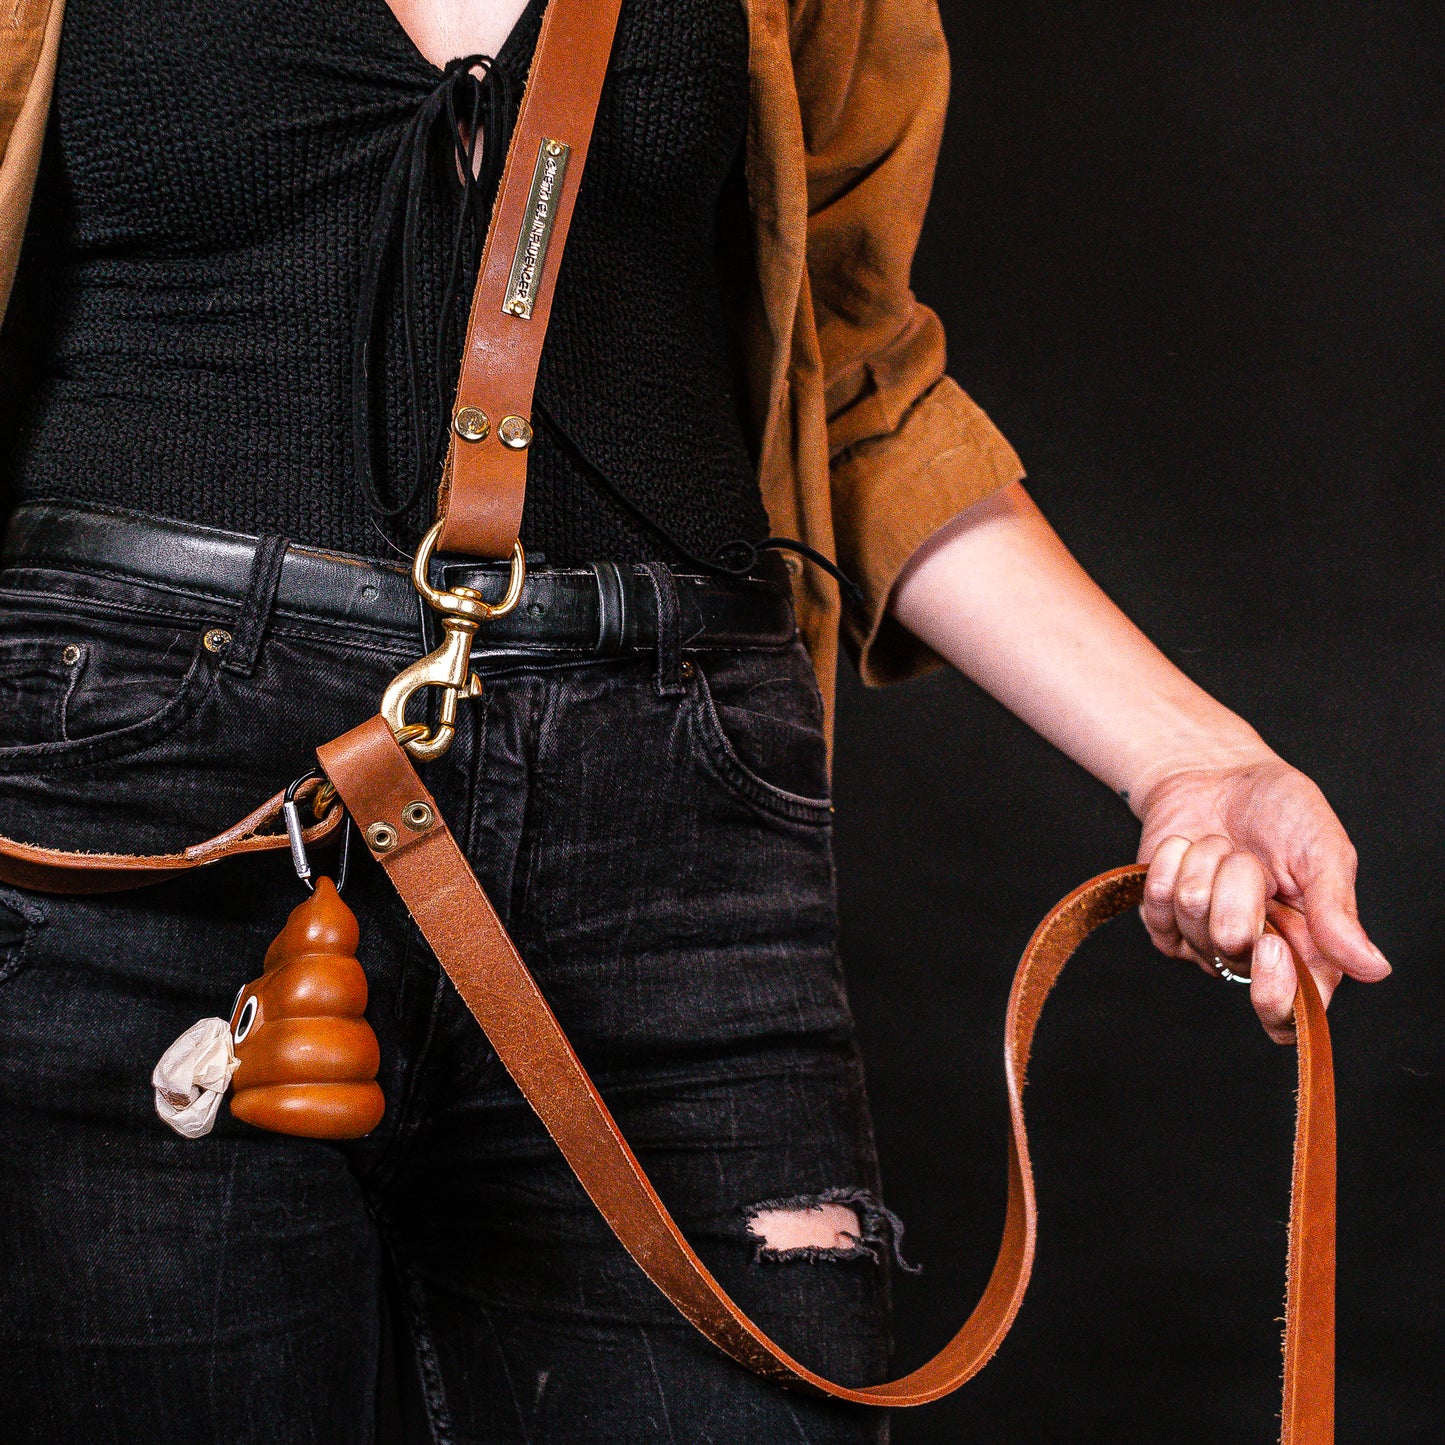 Zoom in to hands free leash in female model´s torso, which shows a bag dispenser with bags.